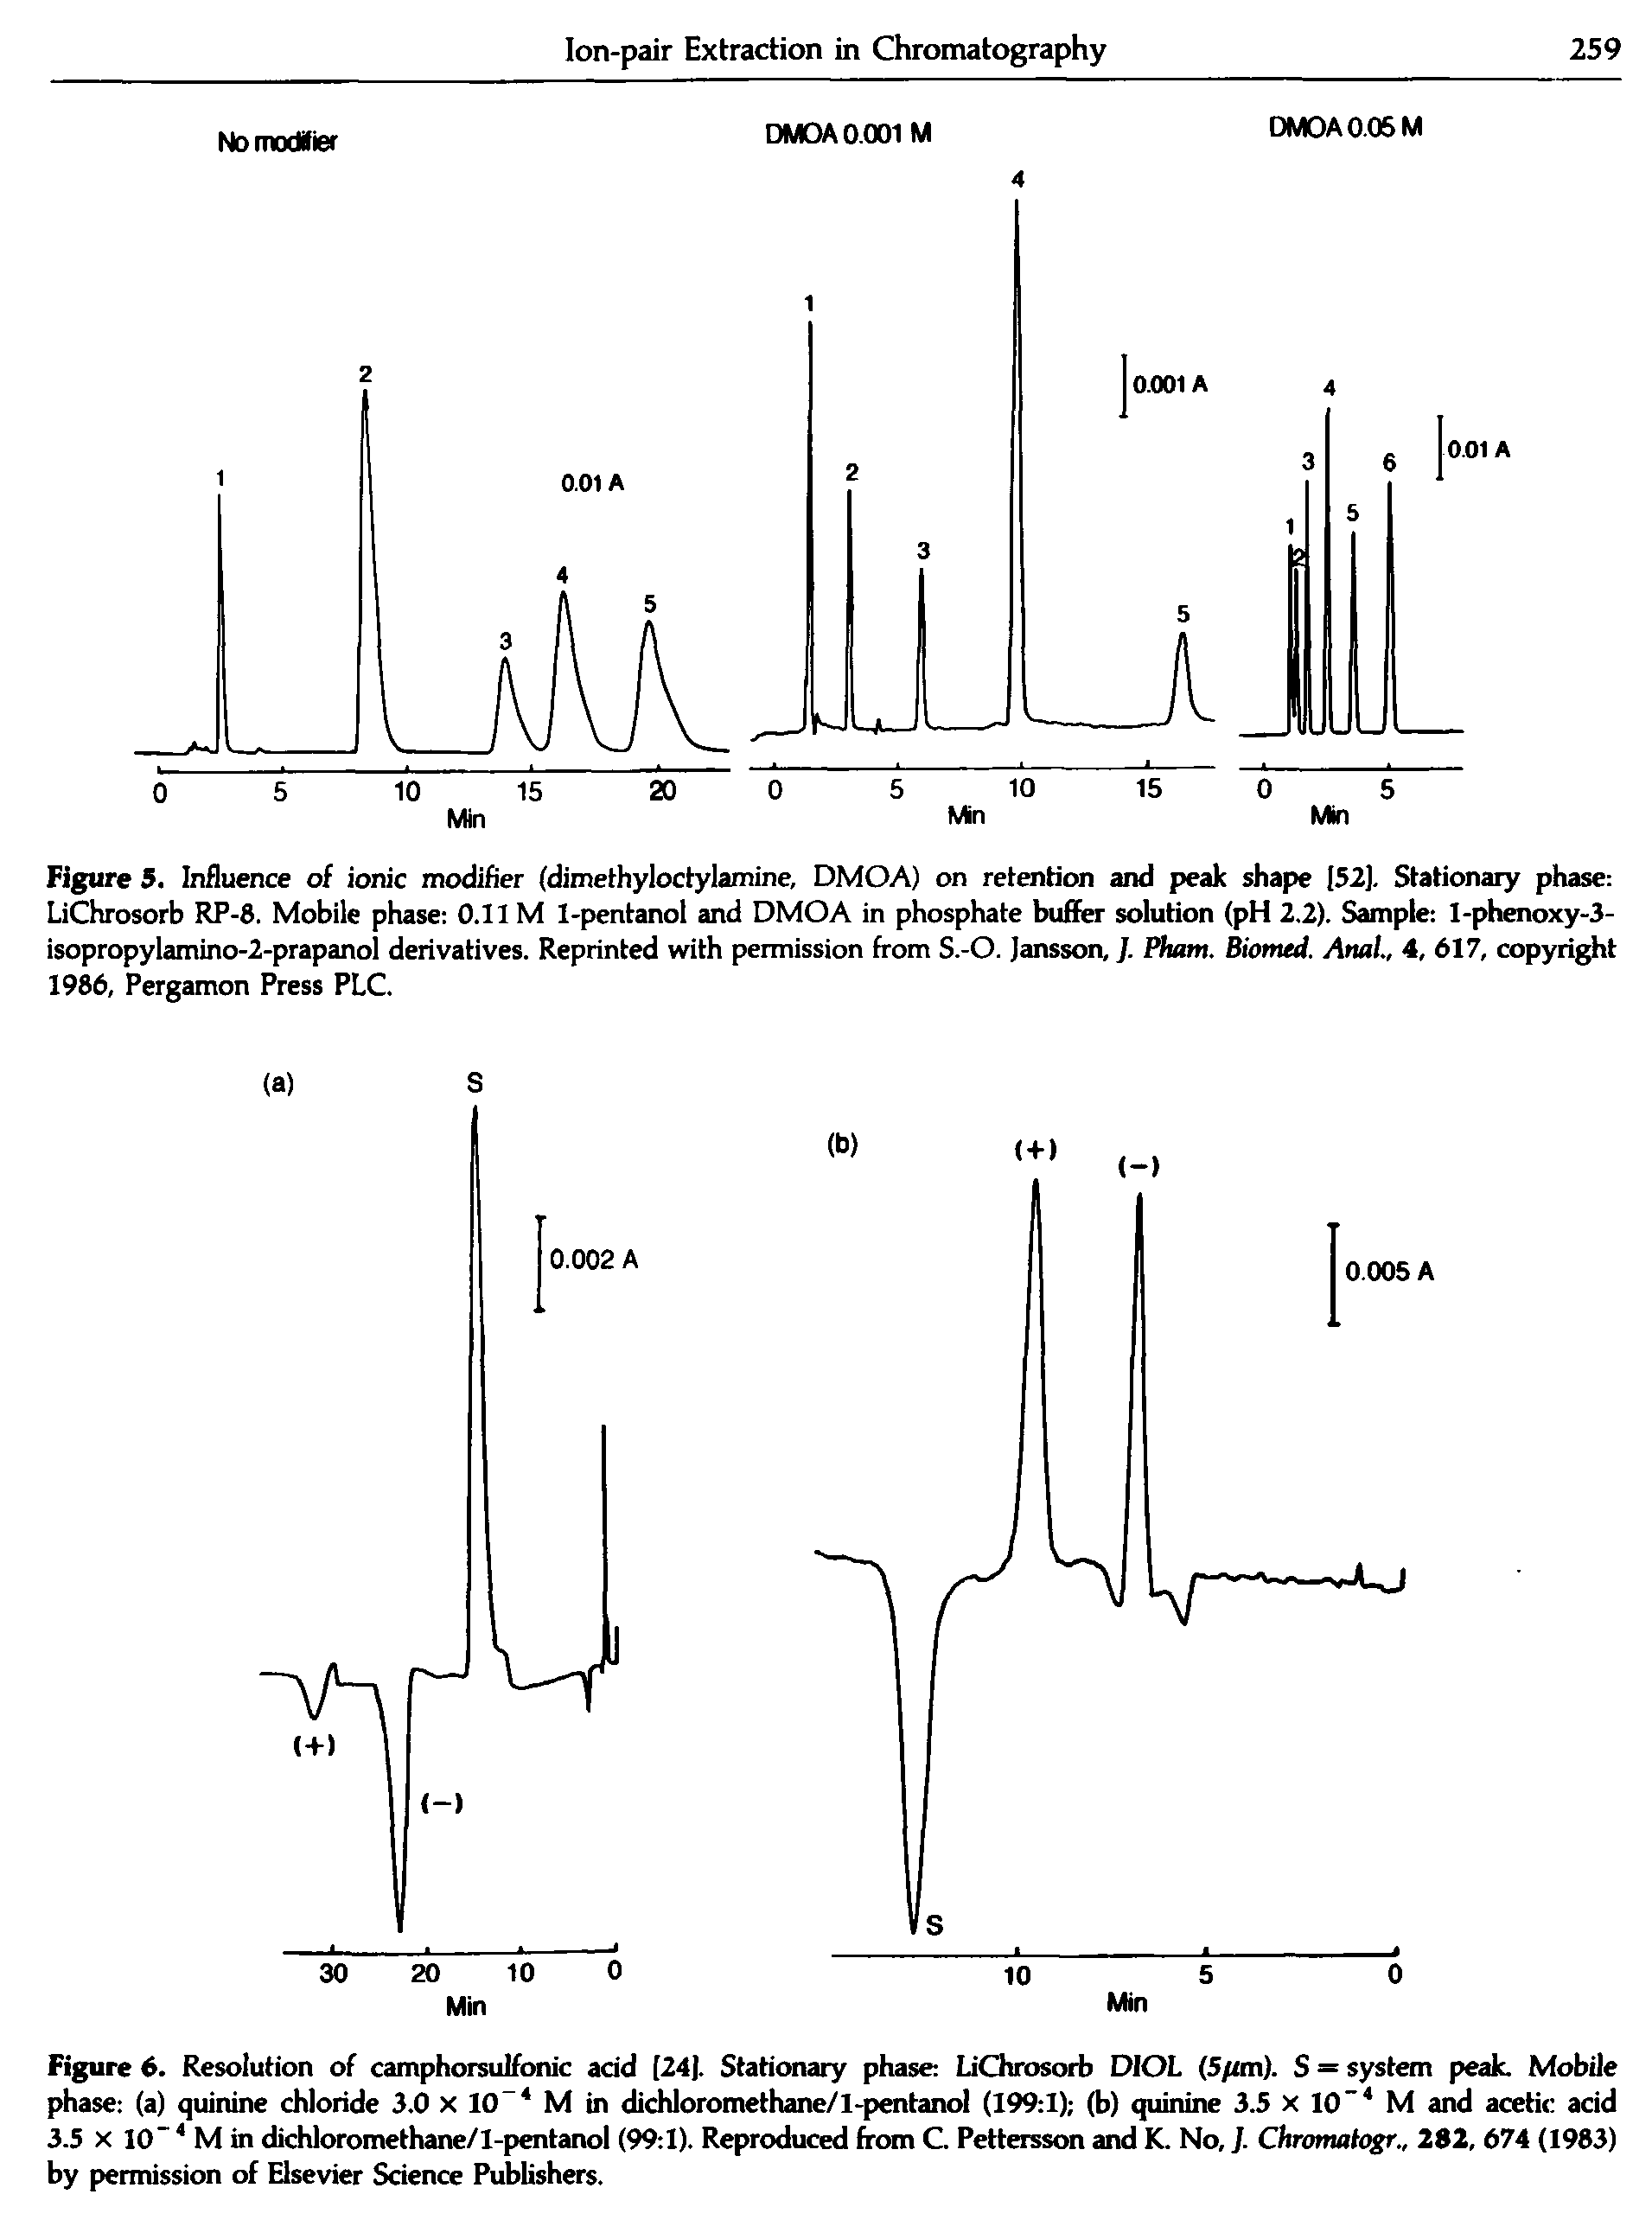 Figure 5. Influence of ionic modifier (dimethyloctylamine, DMOA) on retention and peak shape 152], Stationary phase LiChrosorb RP-8. Mobile phase O.II M 1-pentanol and DMOA in phosphate buffer solution (pH 2.2). Sample I-phenoxy-3-isopropylamino-2-prapanol derivatives. Reprinted with permission from S.-O. Jansson, ]. Pham. Biomed. Anal., 4, 617, copyright 1986, Pergamon Press PLC.